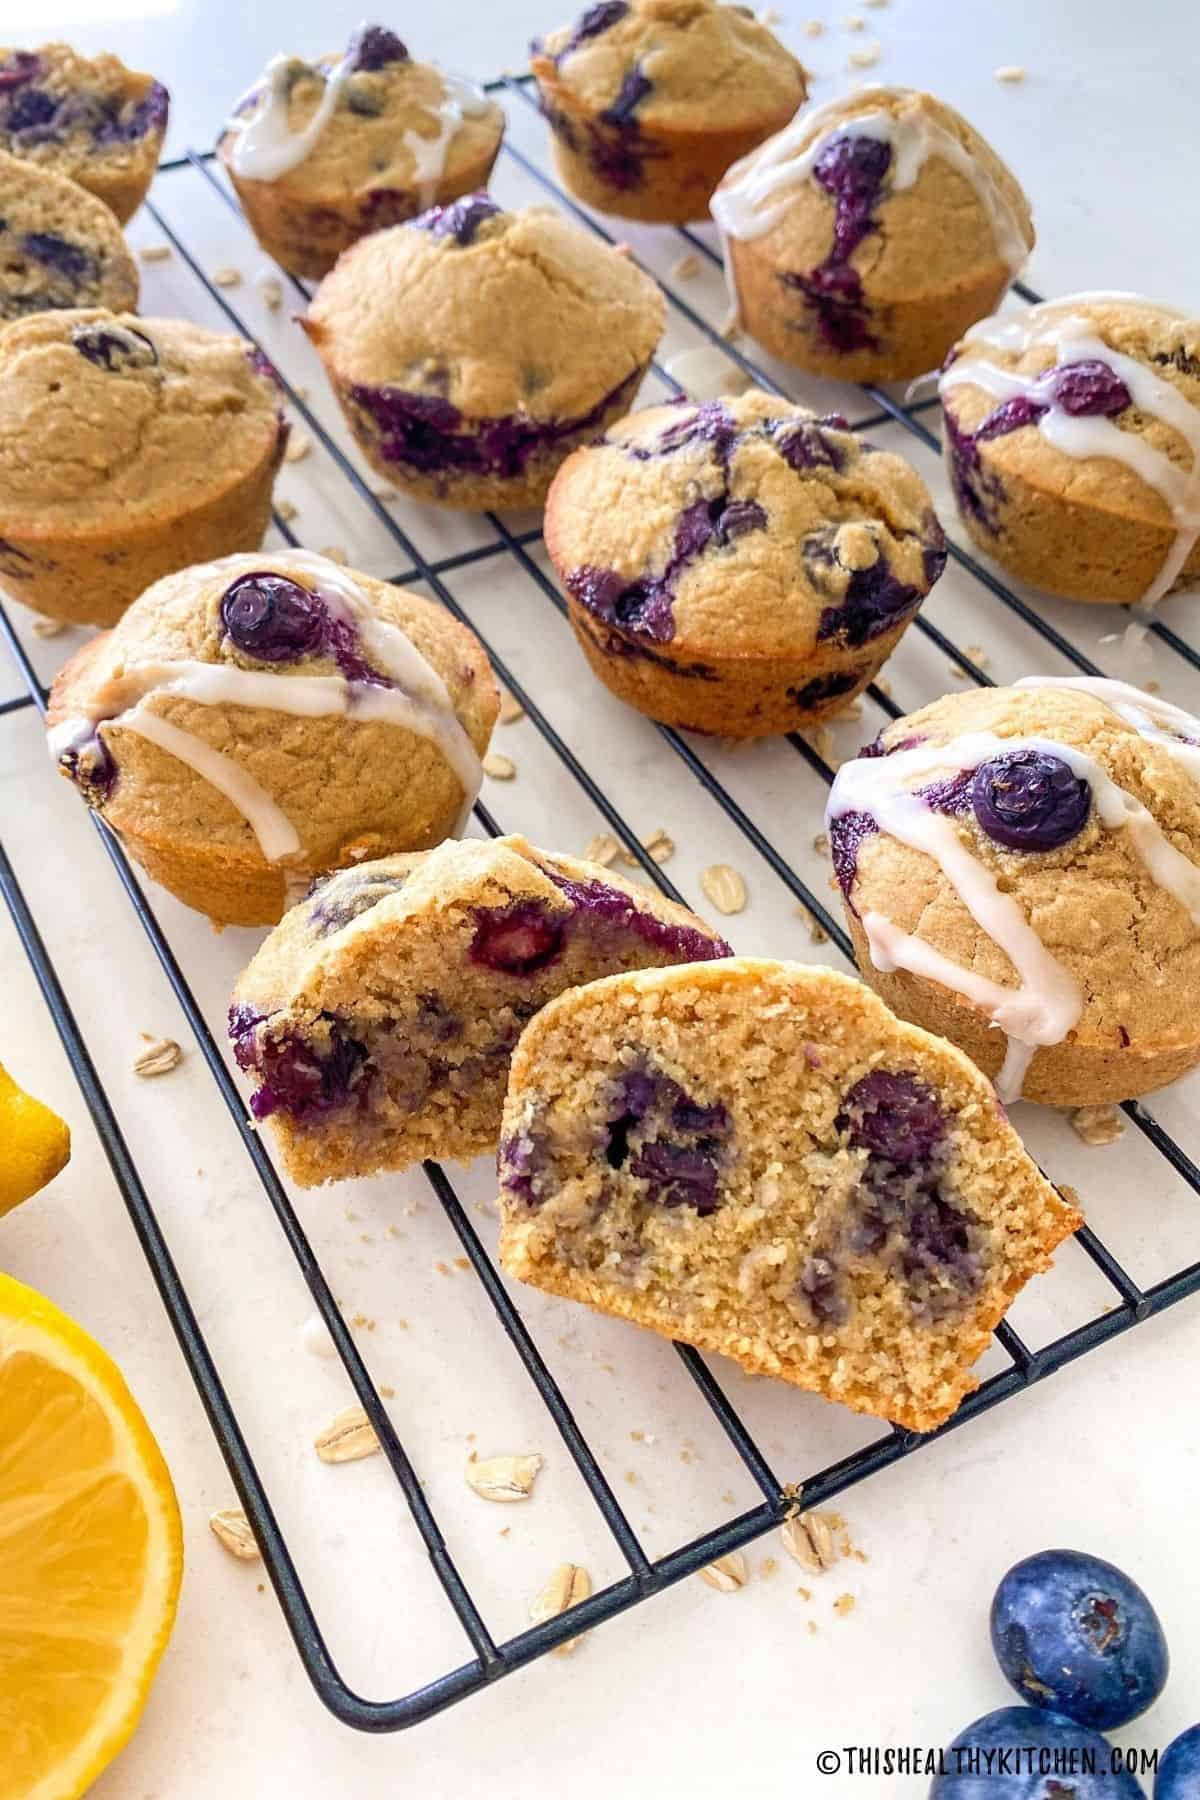 Blueberry muffins on cooling rack with one of them cut in half to expose blueberries inside.